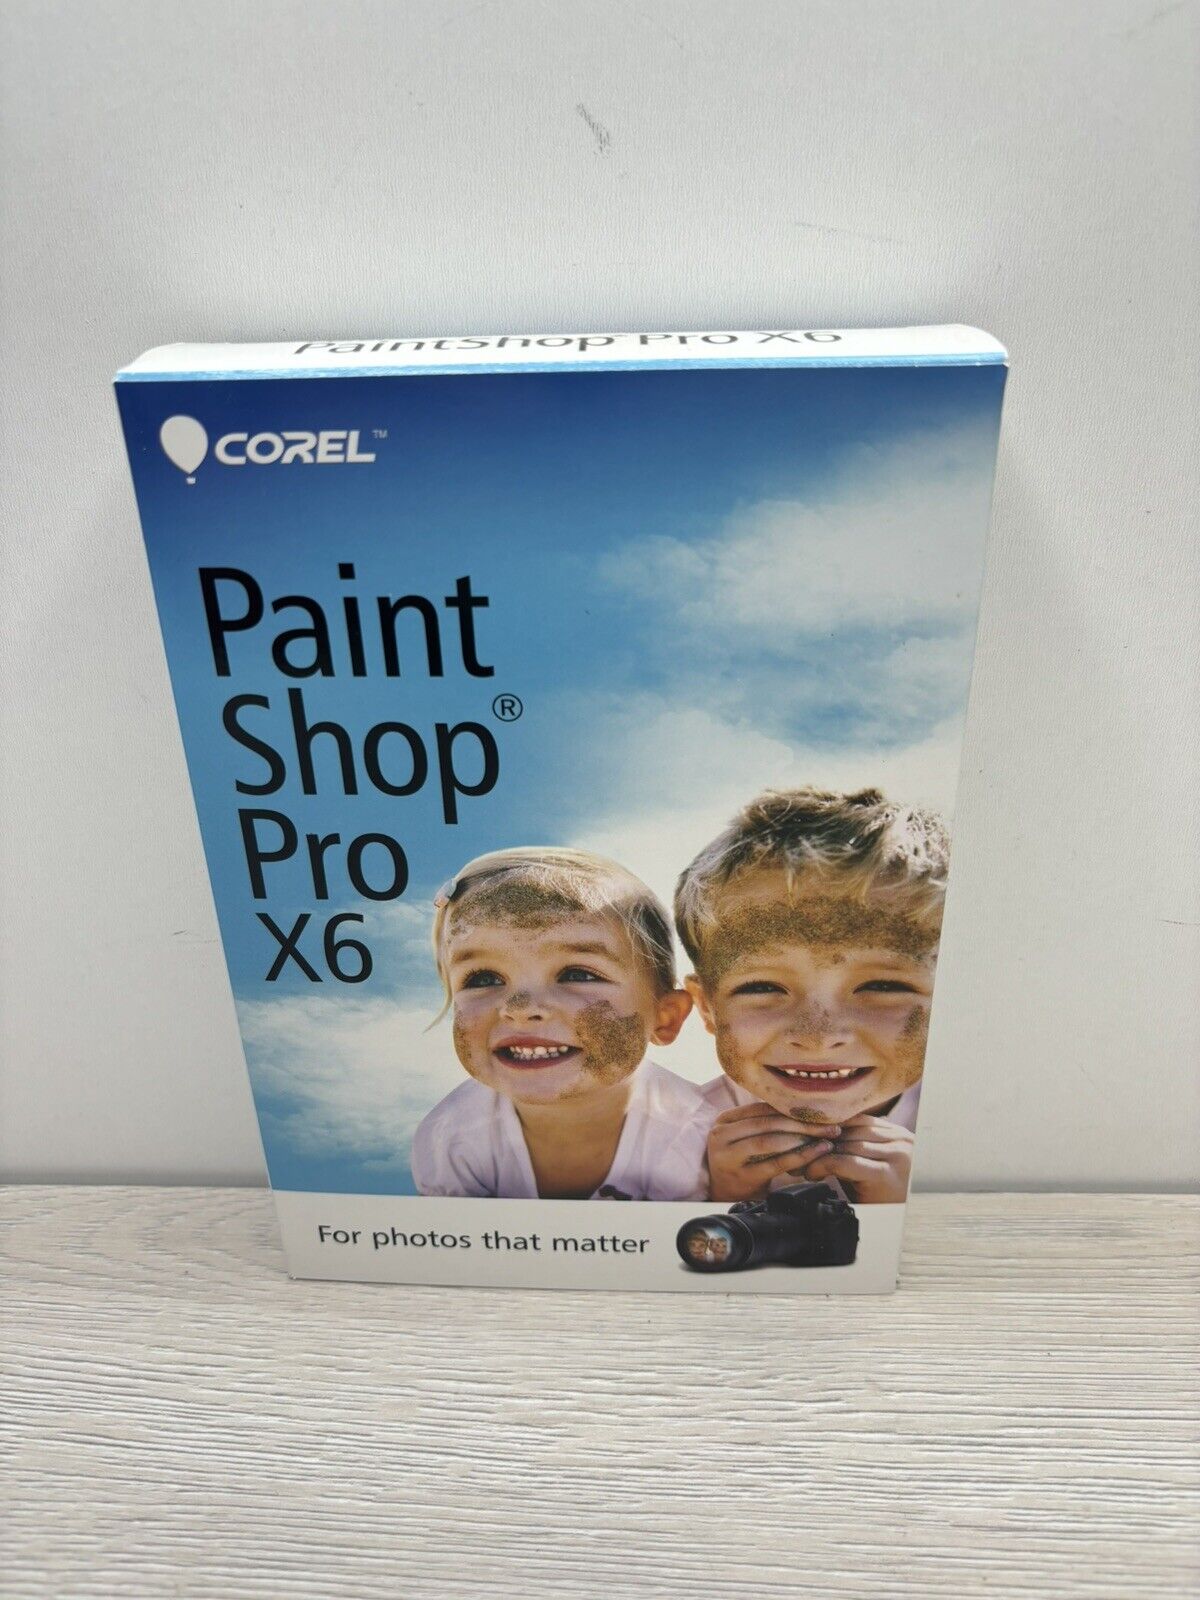 Corel Paint Shop Pro x6 COMPLETE W/ Serial number - Brand New Unopened